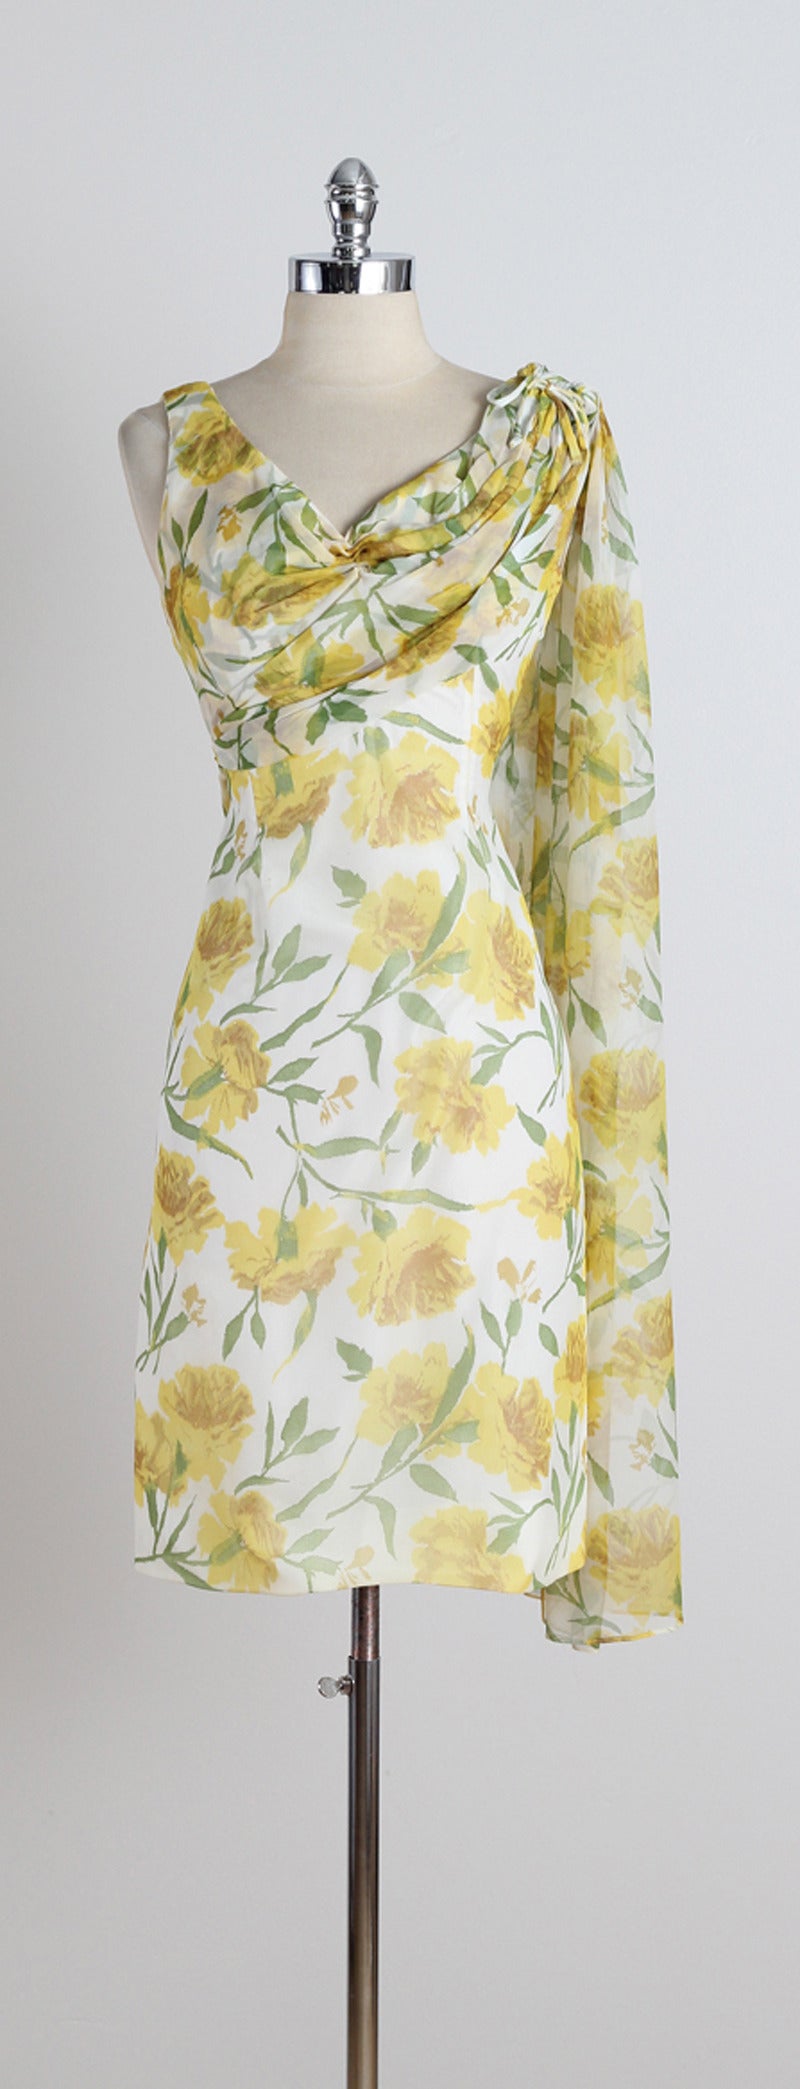 Vintage 1950s Yellow Floral Crepe Chiffon Cocktail Dress For Sale 4